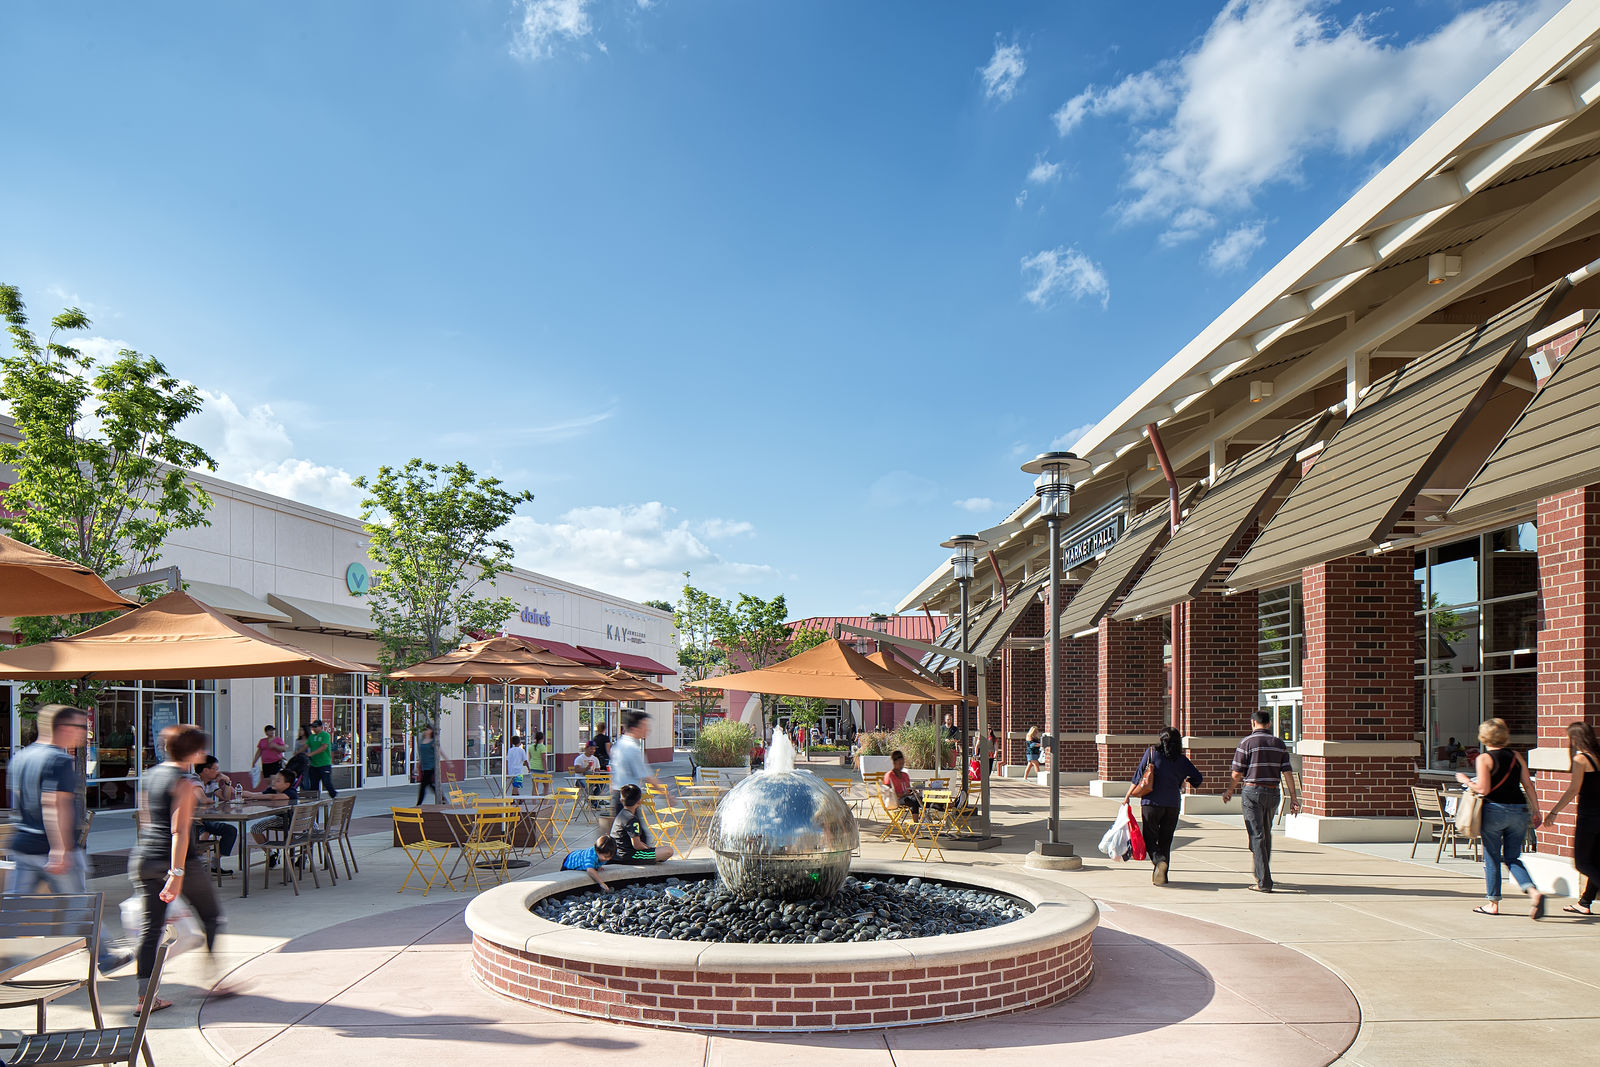 About Chicago Premium Outlets® - A 